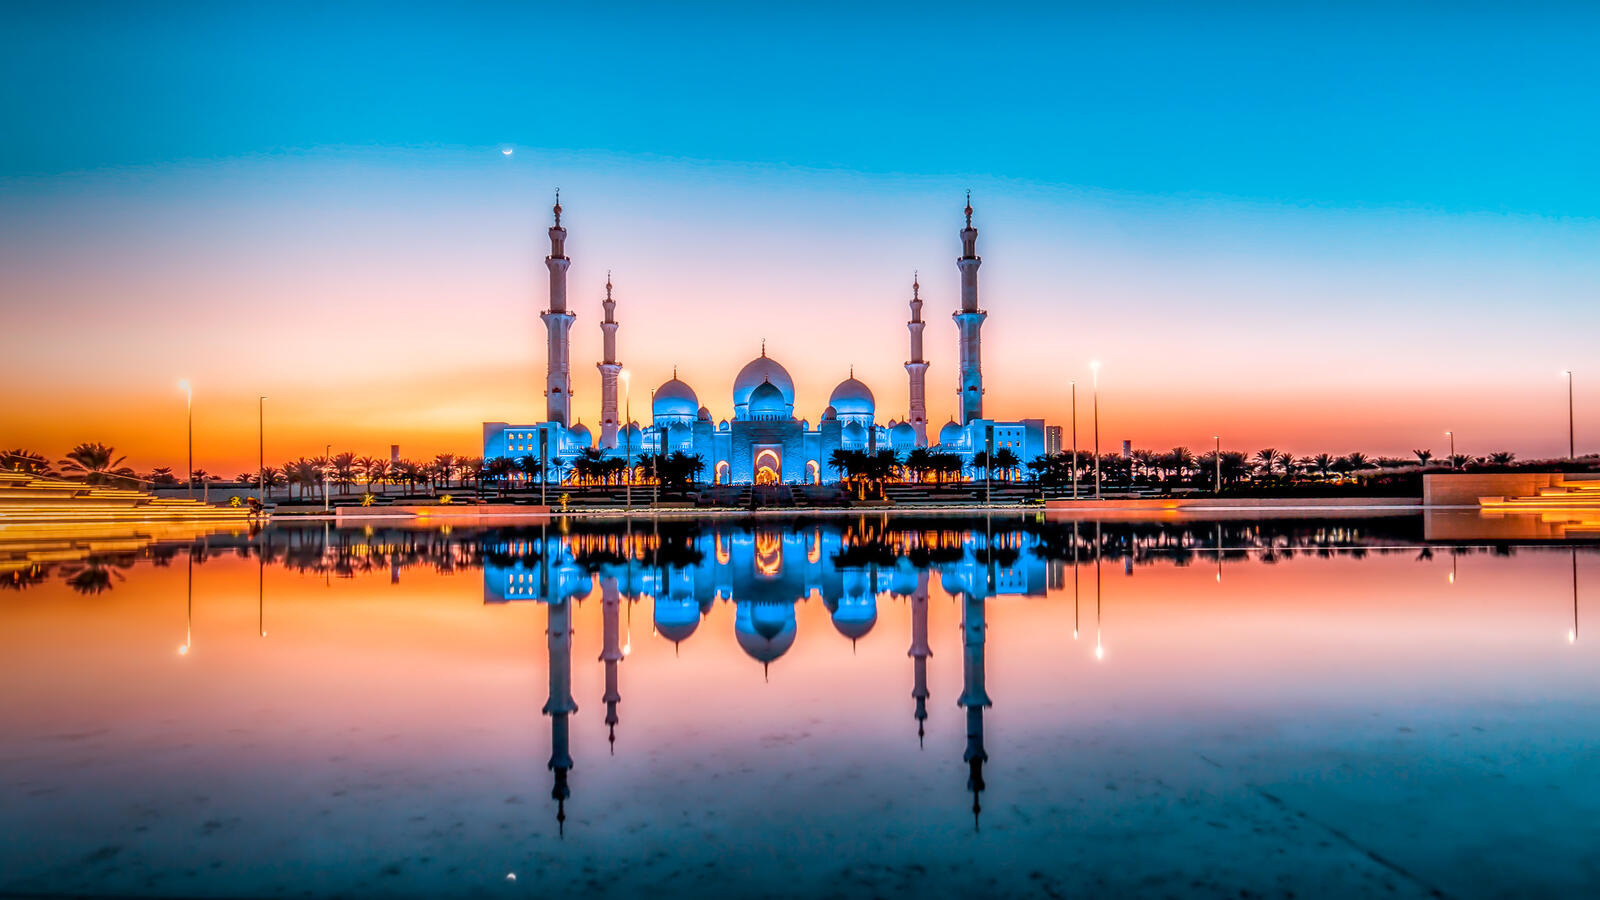 Wallpapers Dhabi Sheikh Zayed Grand Mosque - Abu Dhabi sunset on the desktop